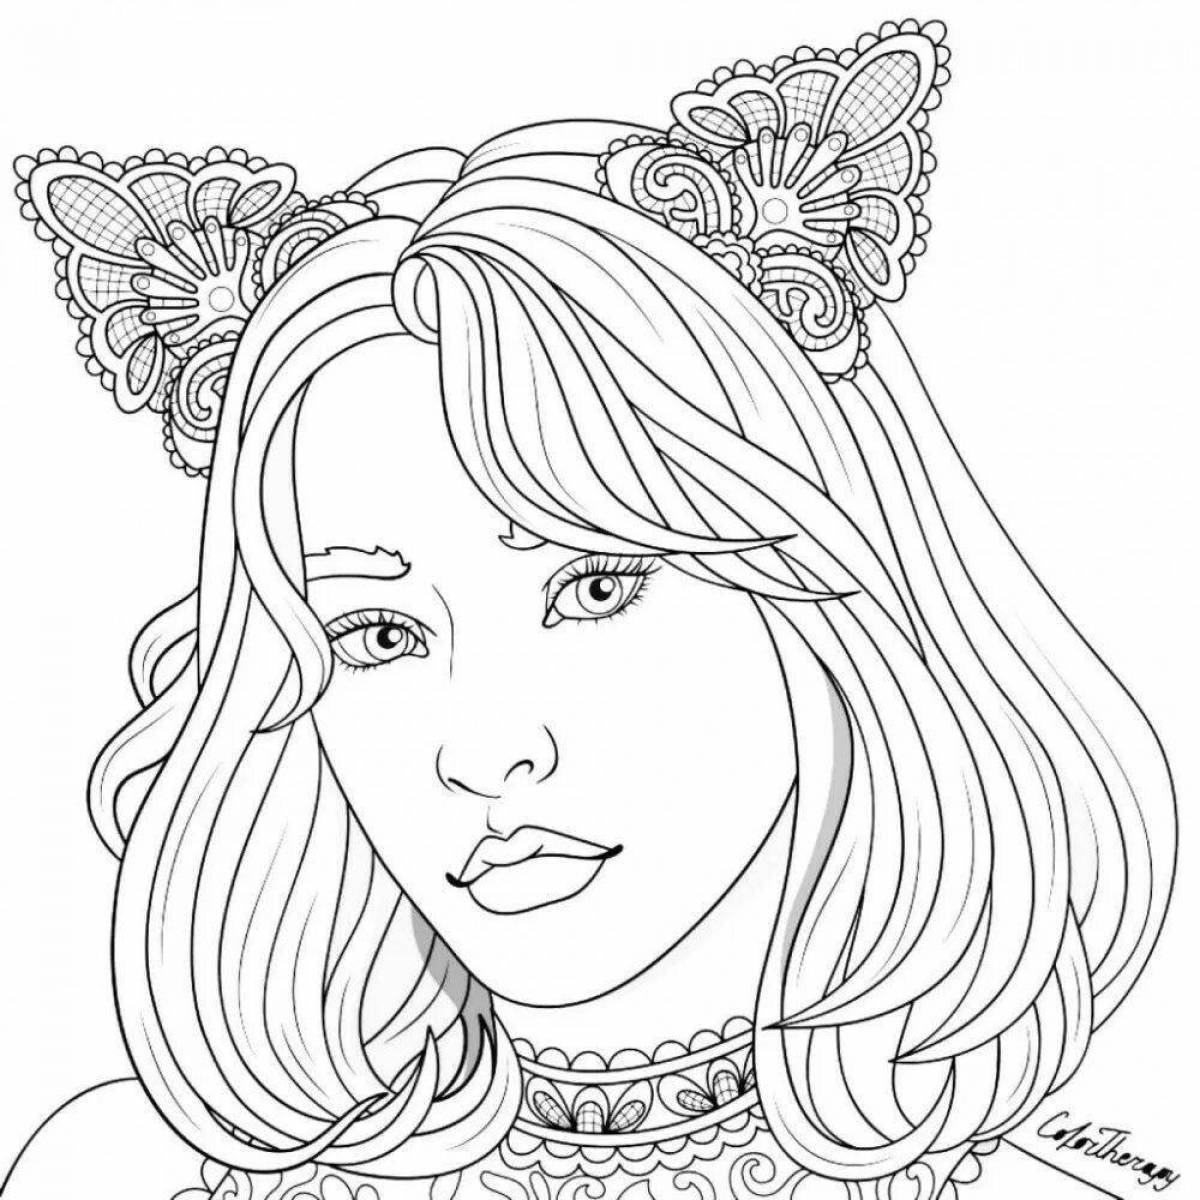 Lora's exciting coloring page